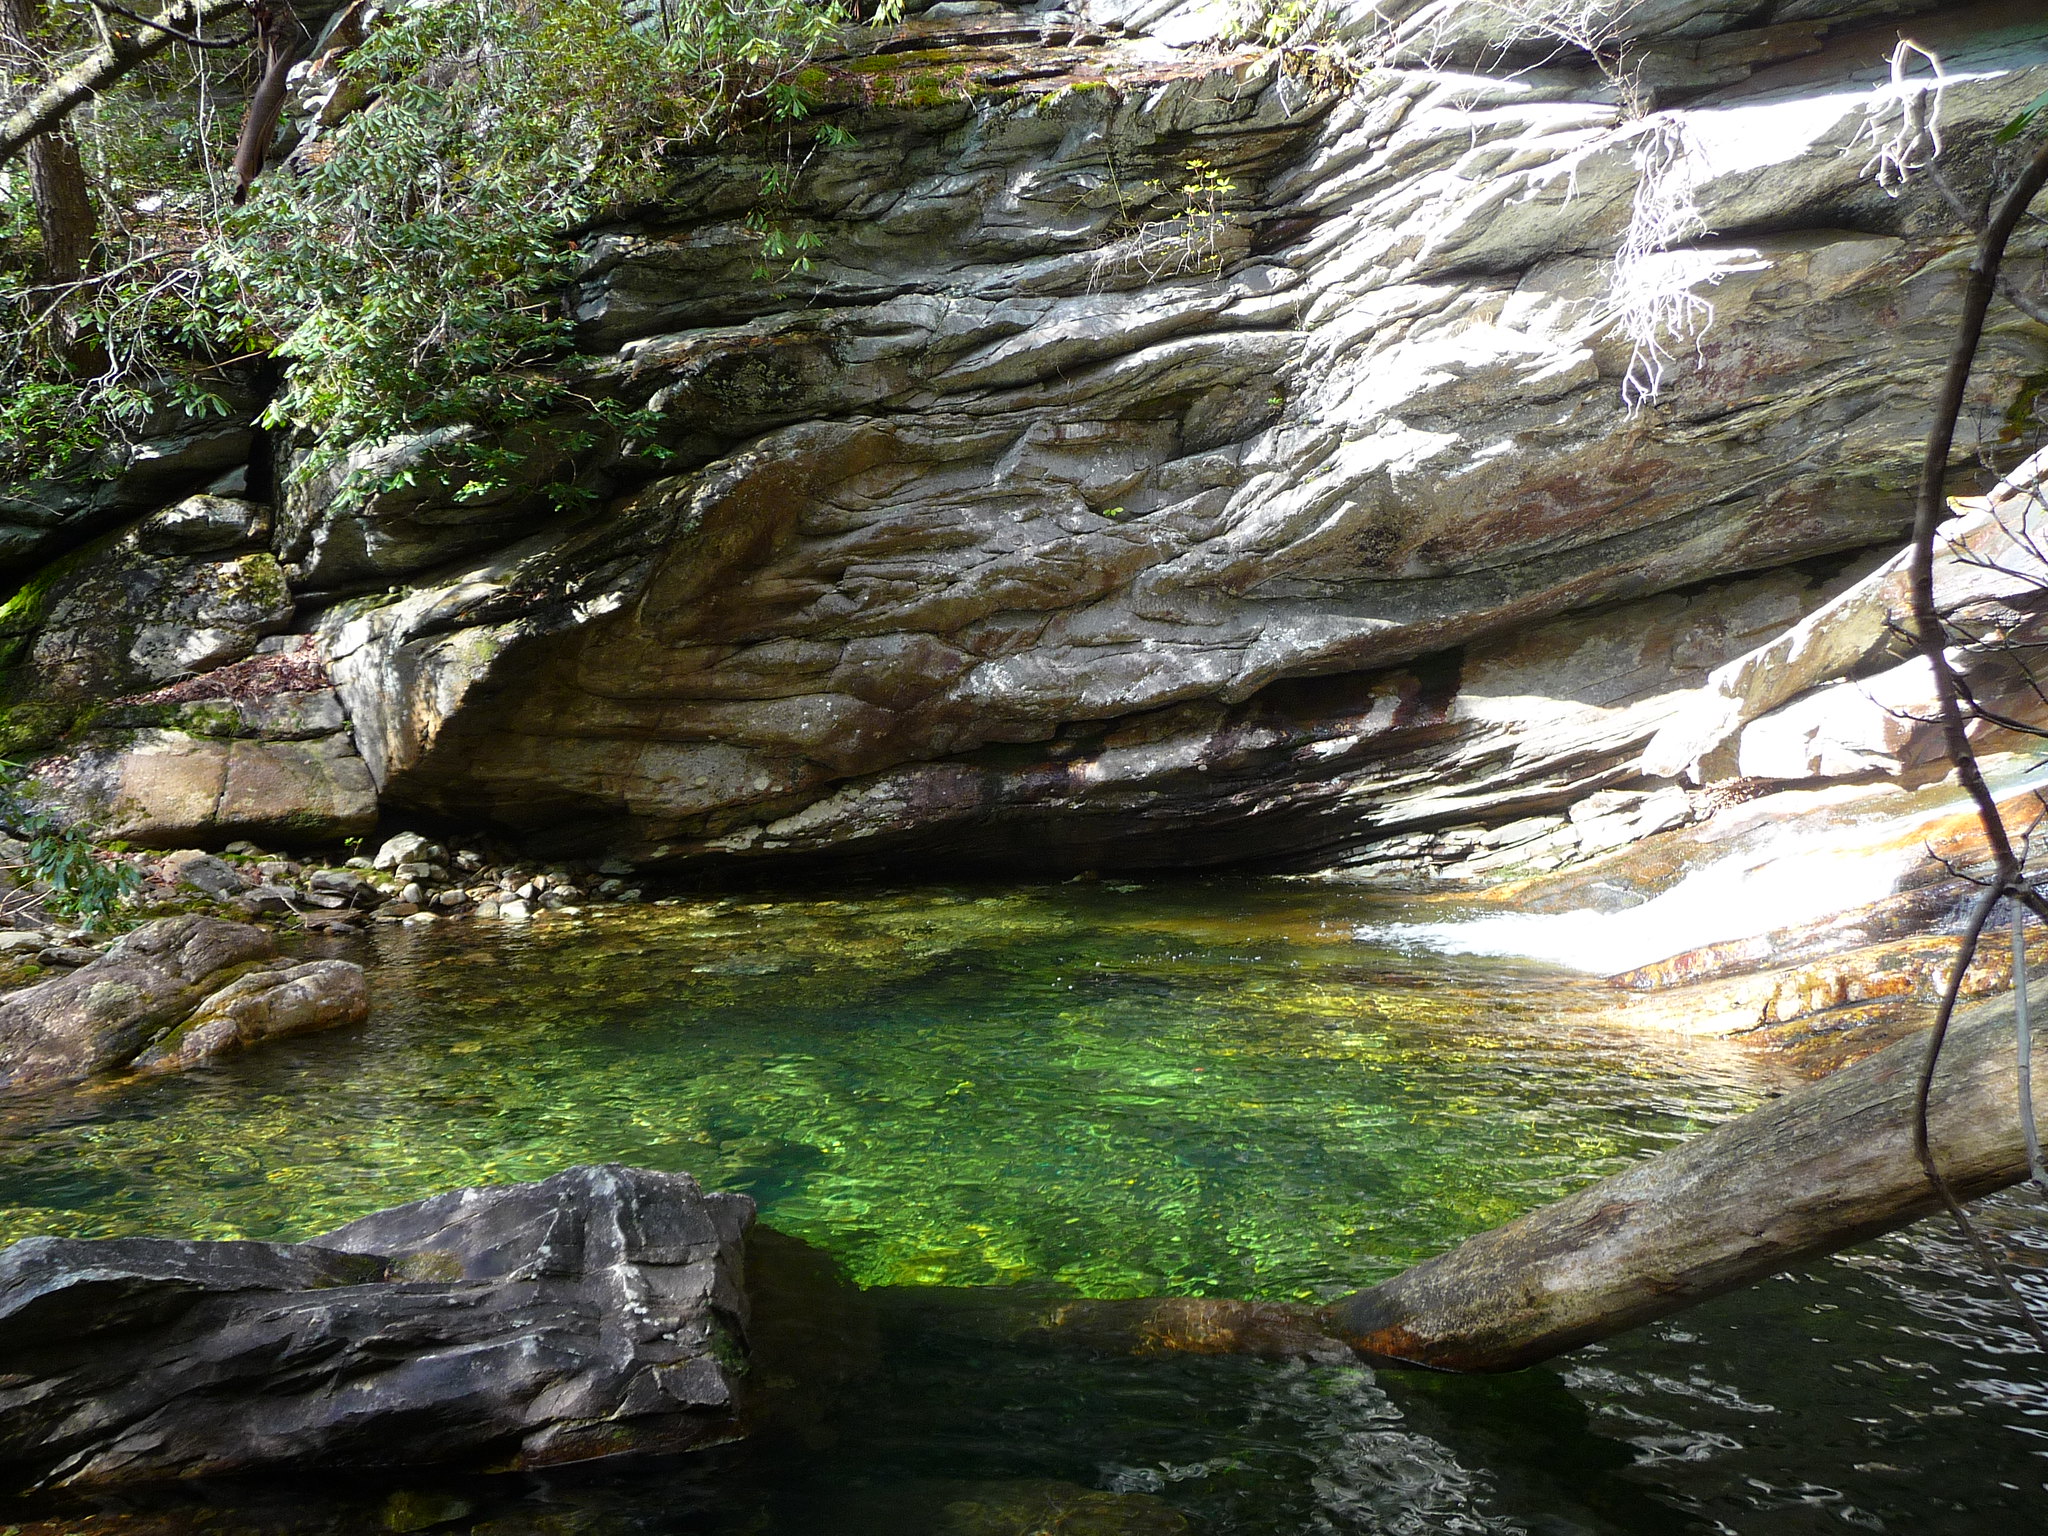 14 Swimming Holes In North Carolina To Take A Dip In